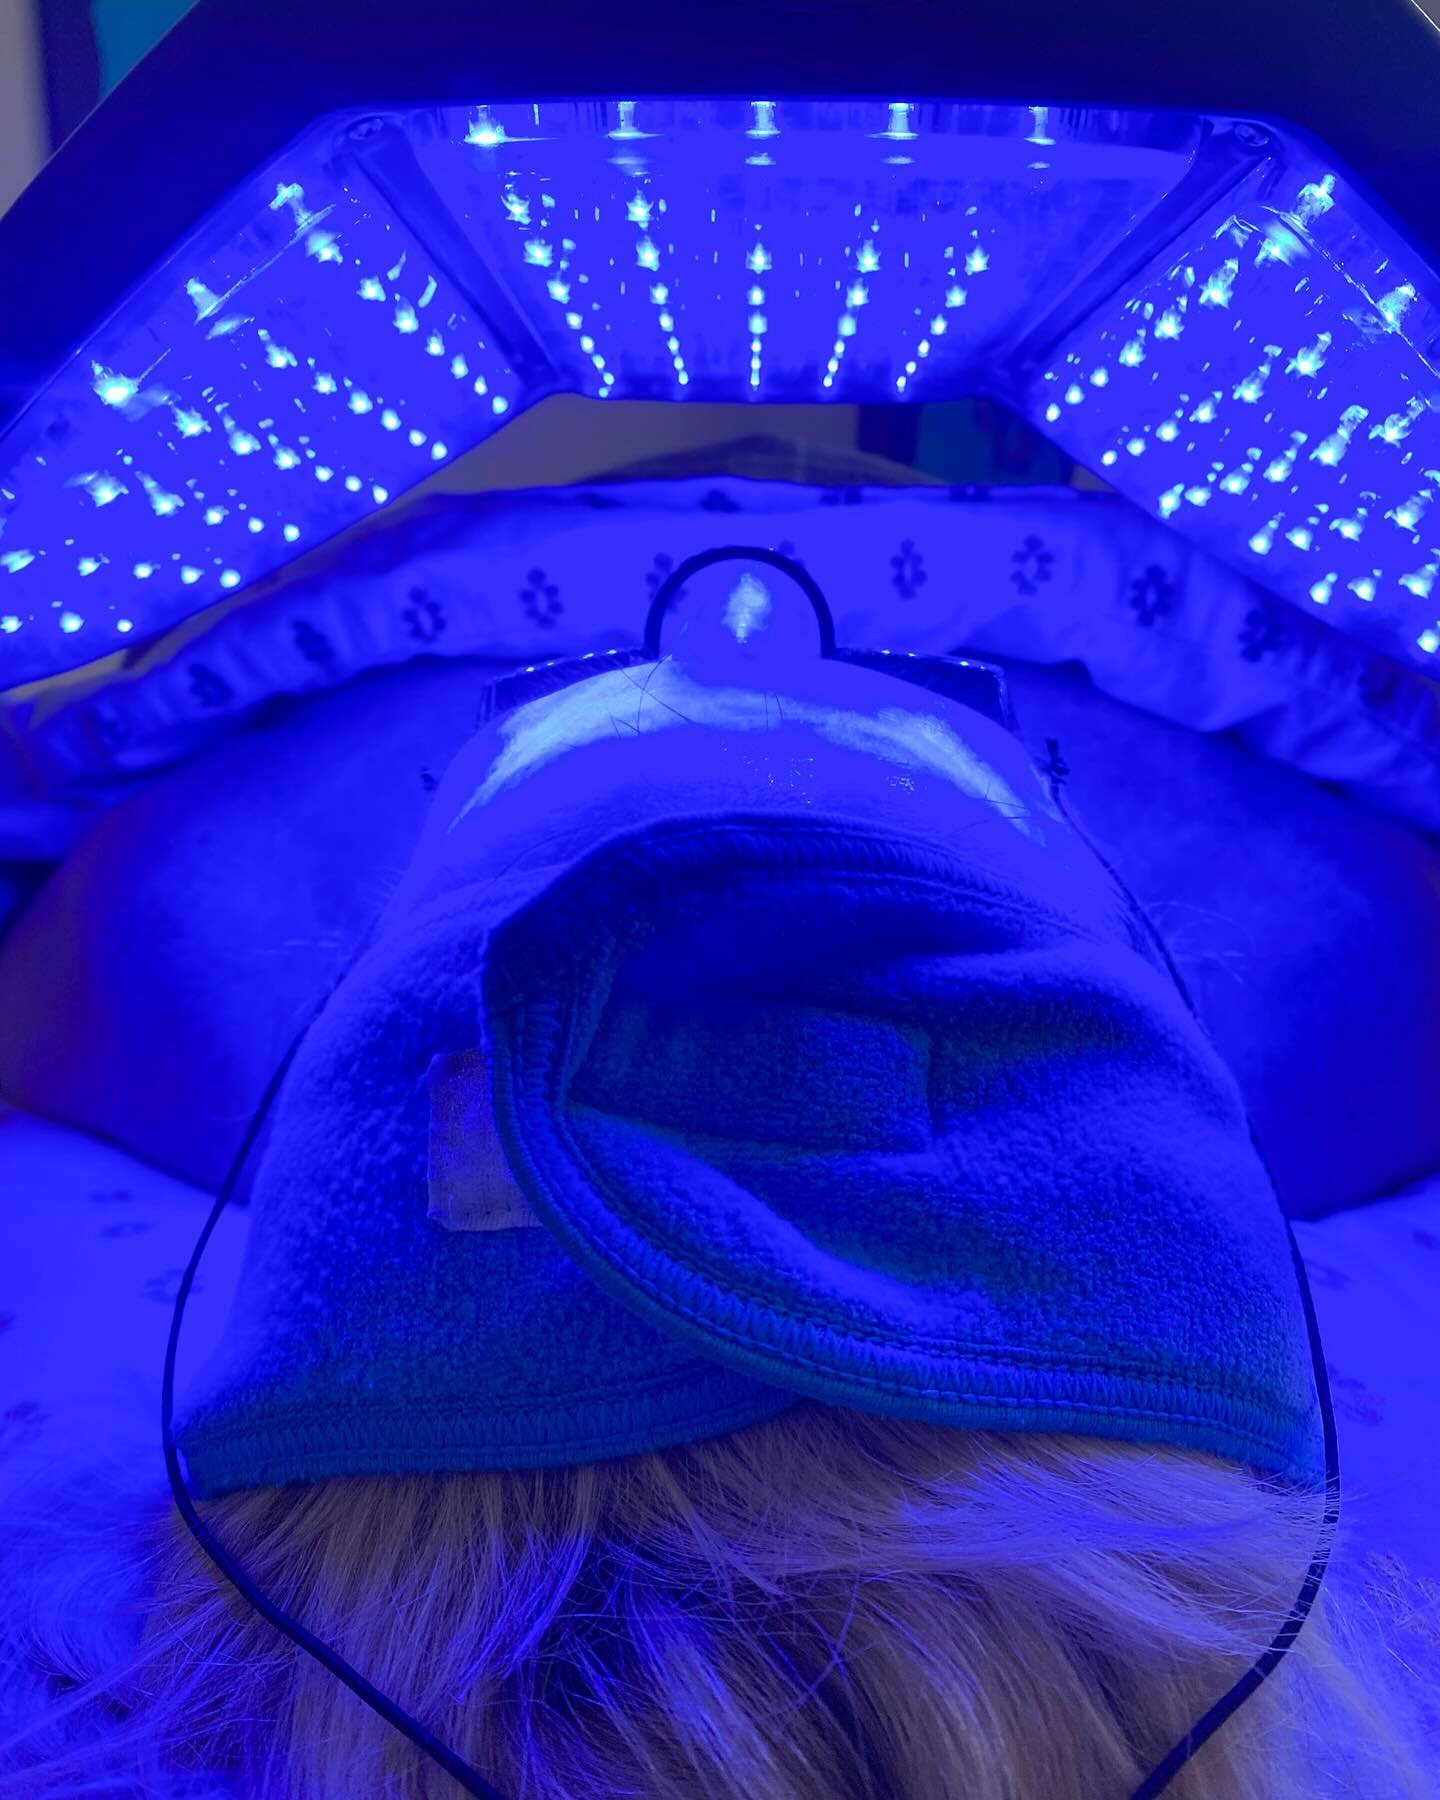 Help treat acne with this blue light Lumilight 💙 
.
.
.
#koreanskincare #koreanbeauty
#memphis #beauty #spa #spatwogether #skincareisselfcare #selfcare #happiness #facial #mask #intraceuticals #algaepeeloffmask #sculpturalfaceliftmassage #enzymether